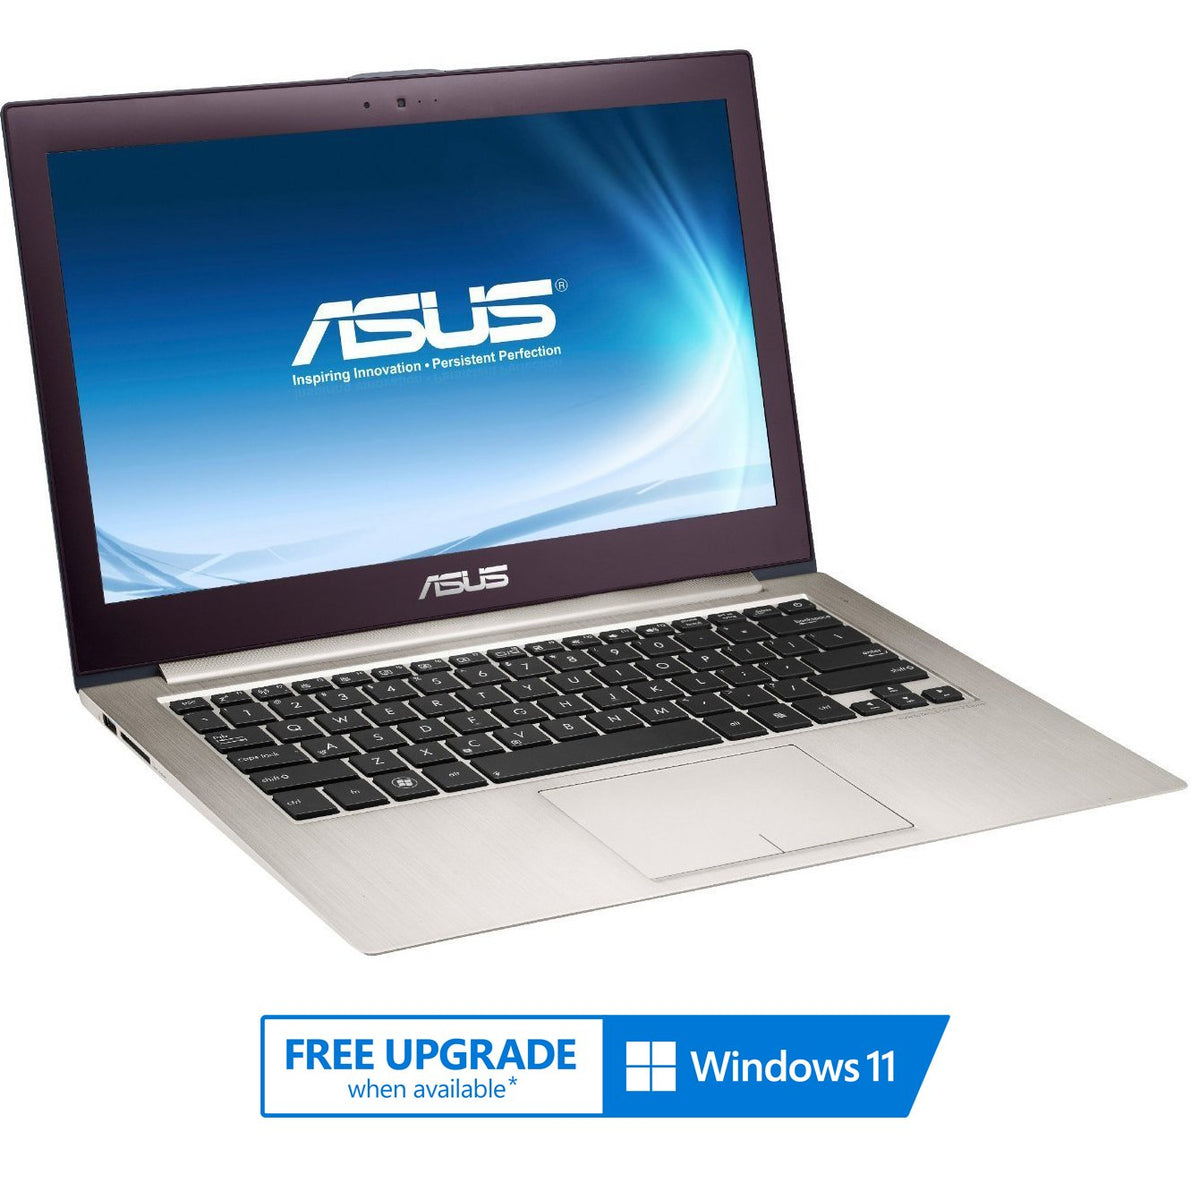 Asus Zenbook UX31A with Core 13.3" Full HD (1920x1080), 4GB Camera